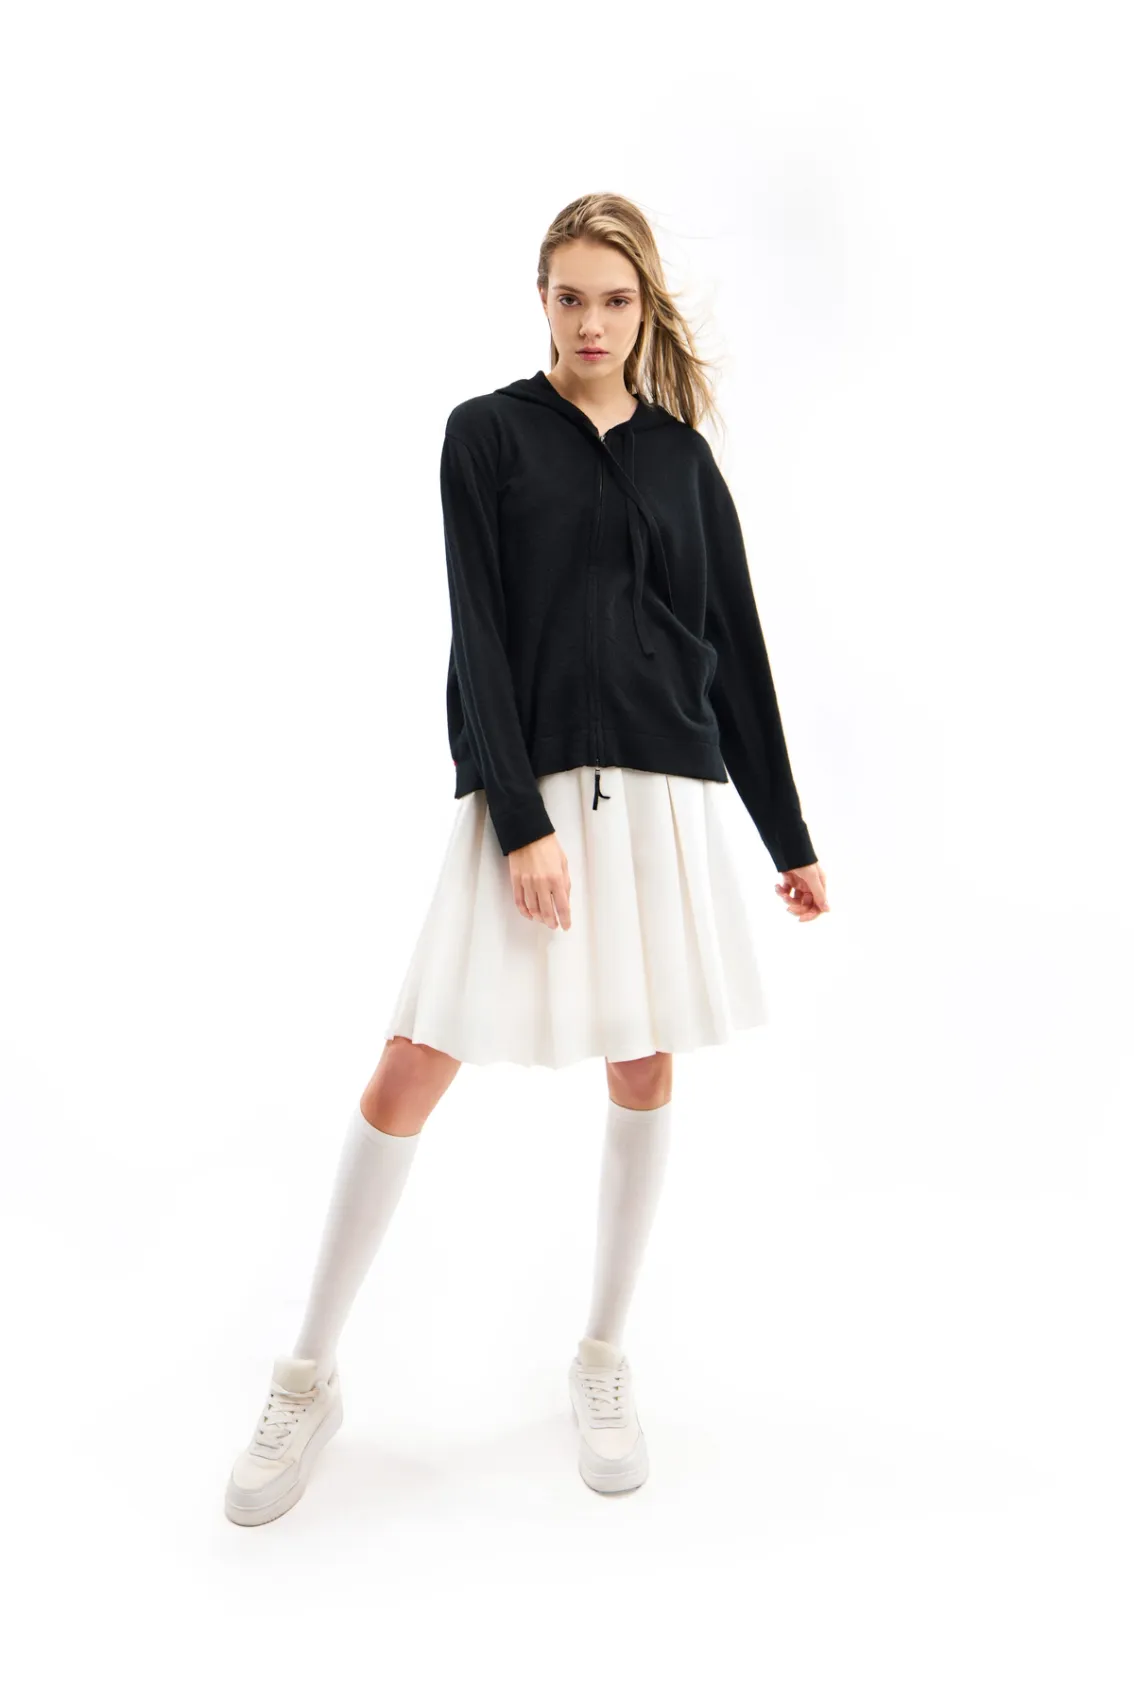 model wearing a cashmere hoodie and a white tennis skirt